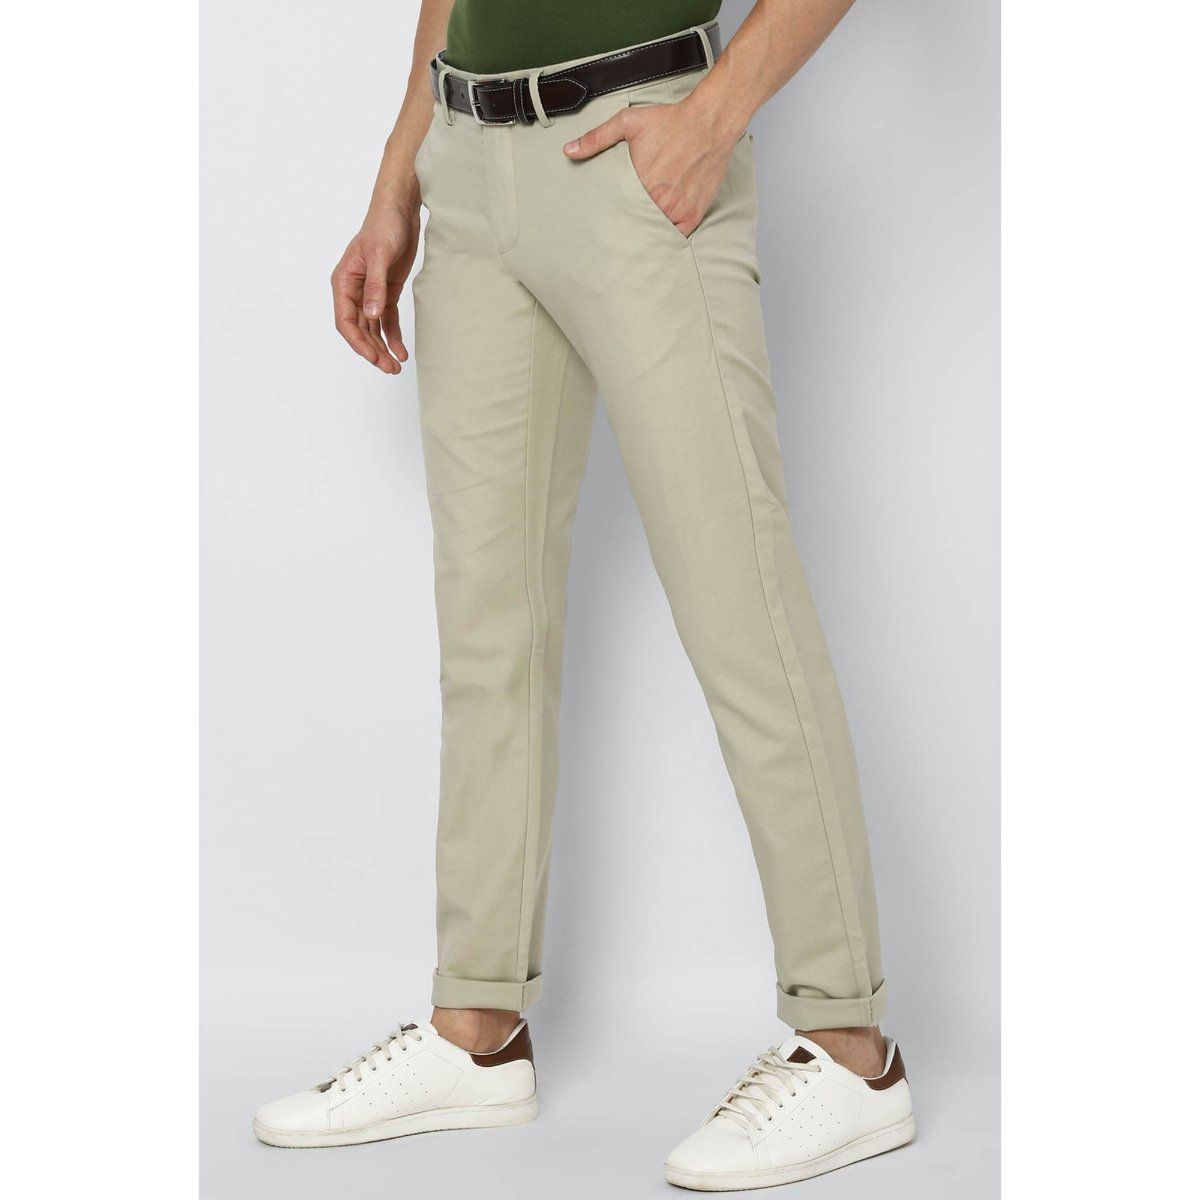 COMBRAIDED Slim Fit Men Dark Green Trousers - Buy COMBRAIDED Slim Fit Men  Dark Green Trousers Online at Best Prices in India | Flipkart.com